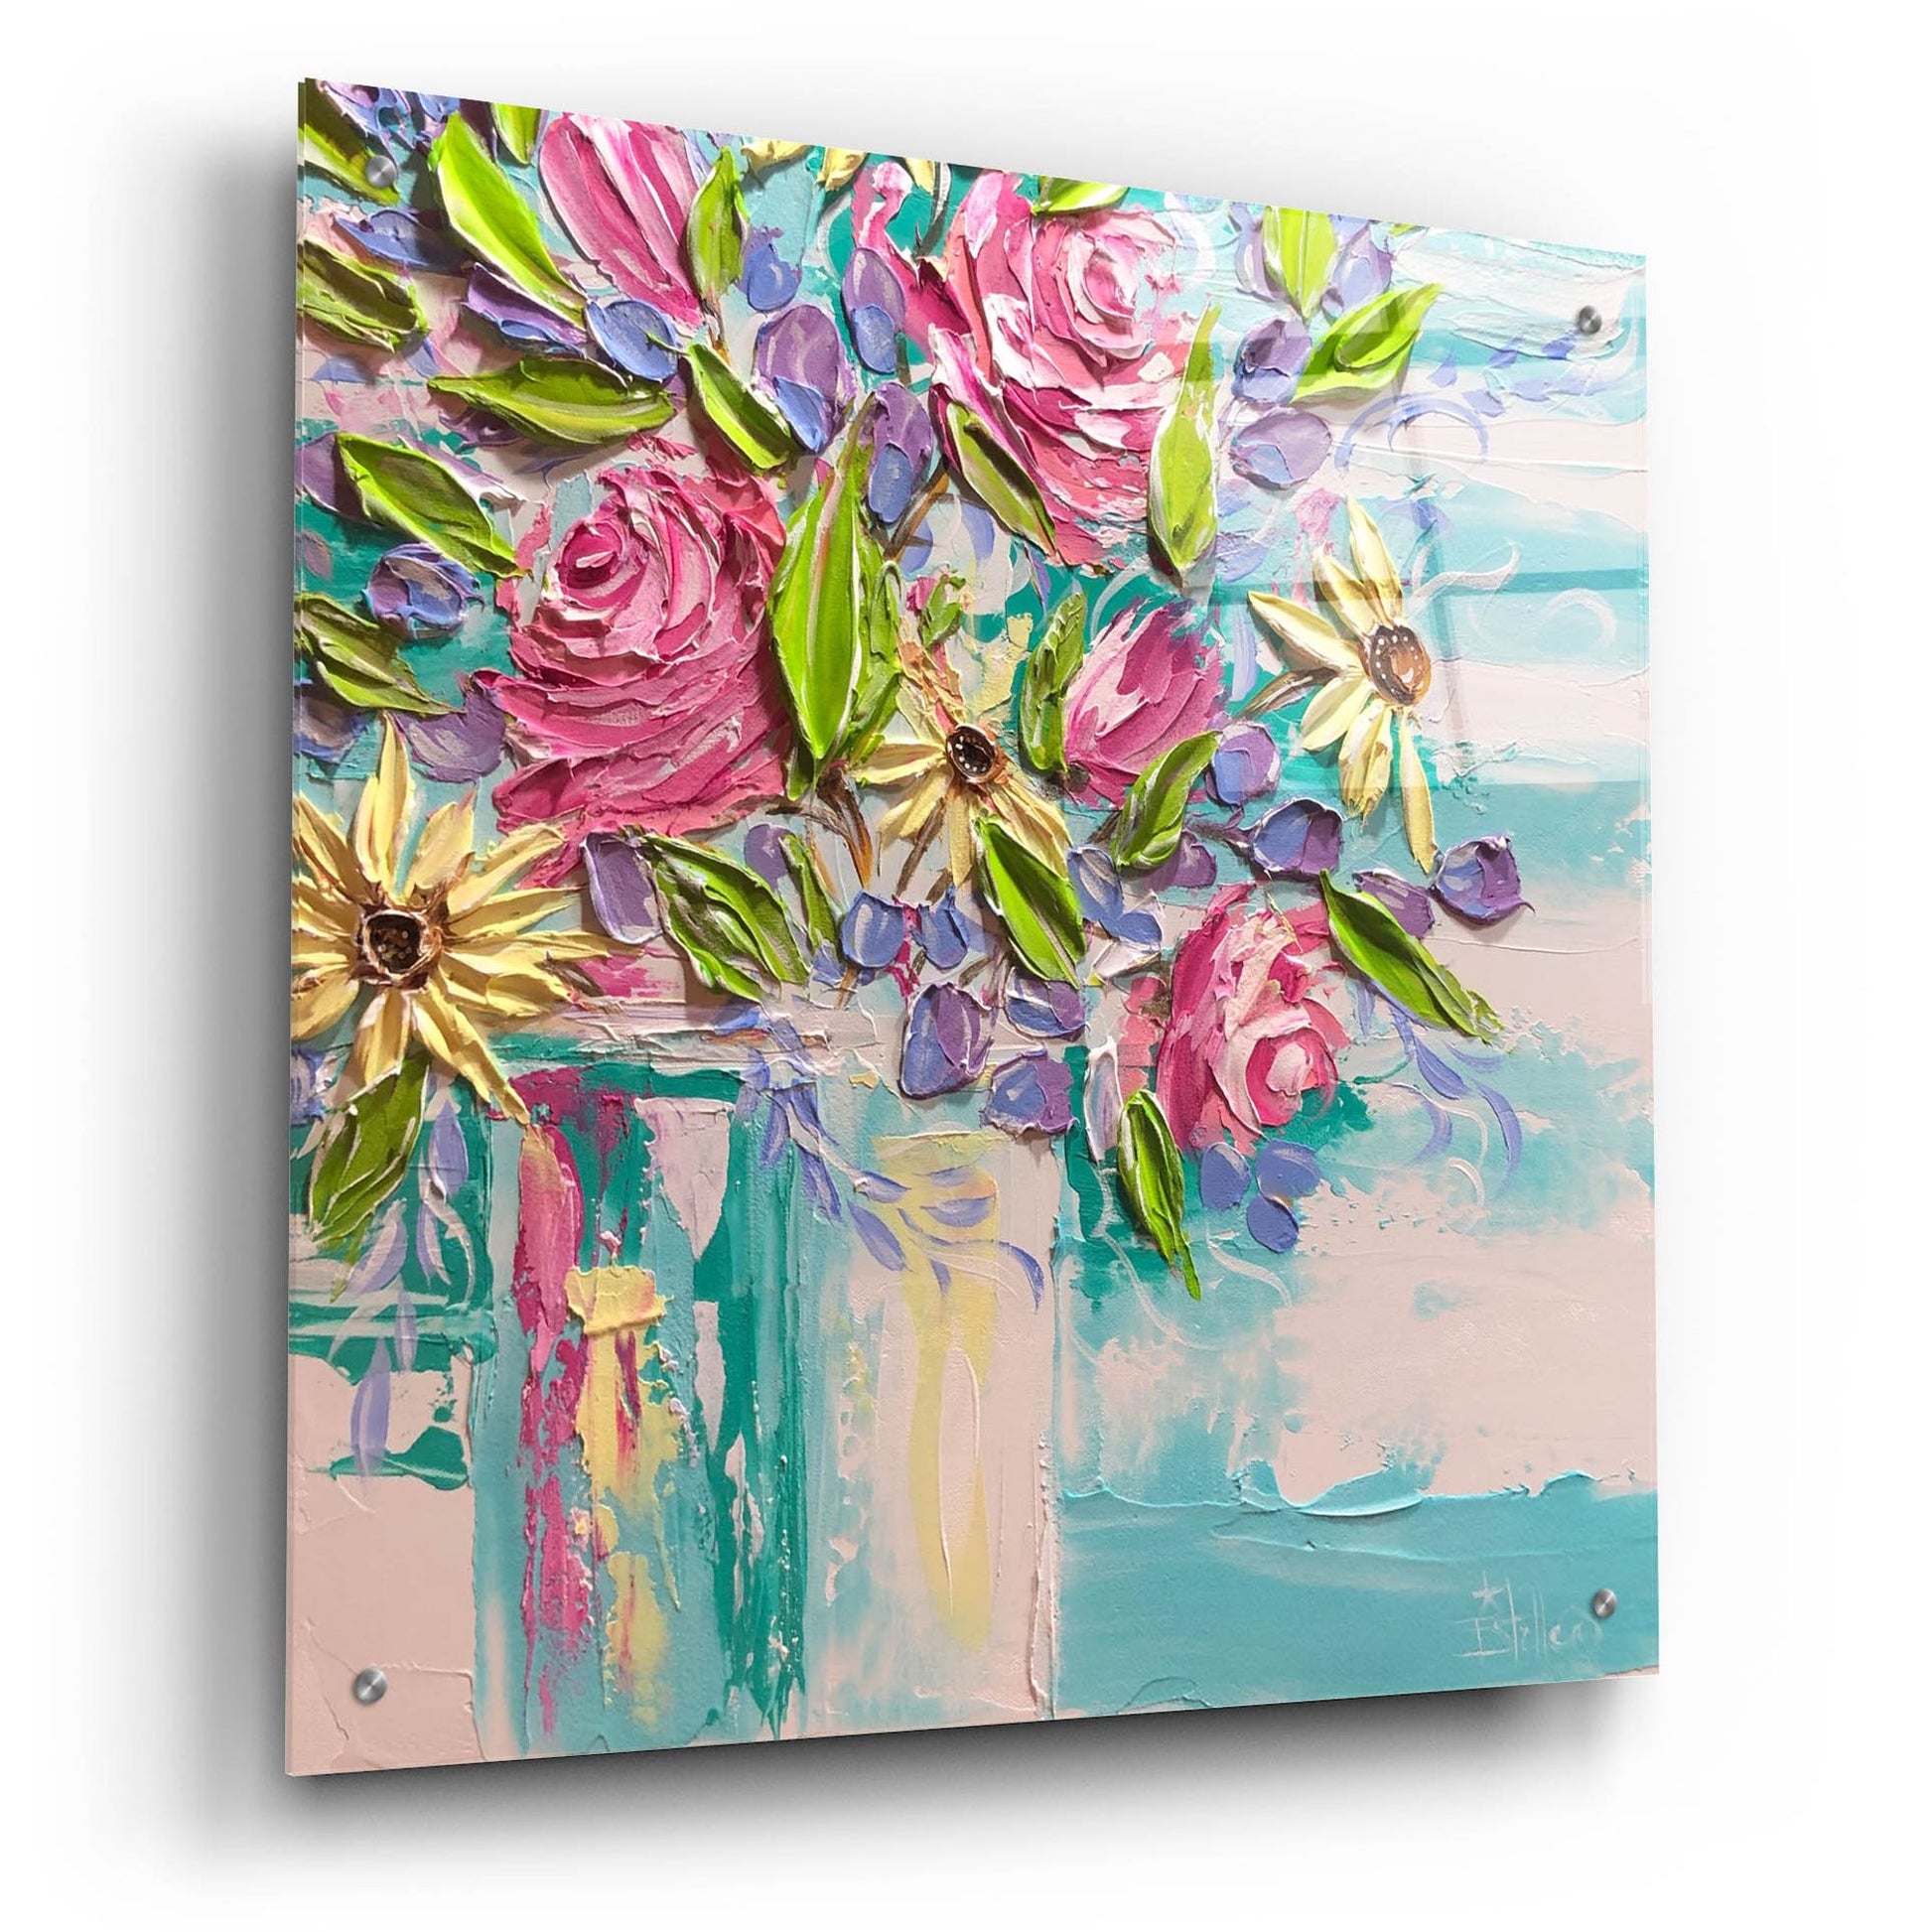 Epic Art 'Floral Bliss' by Estelle Grengs, Acrylic Glass Wall Art,24x24